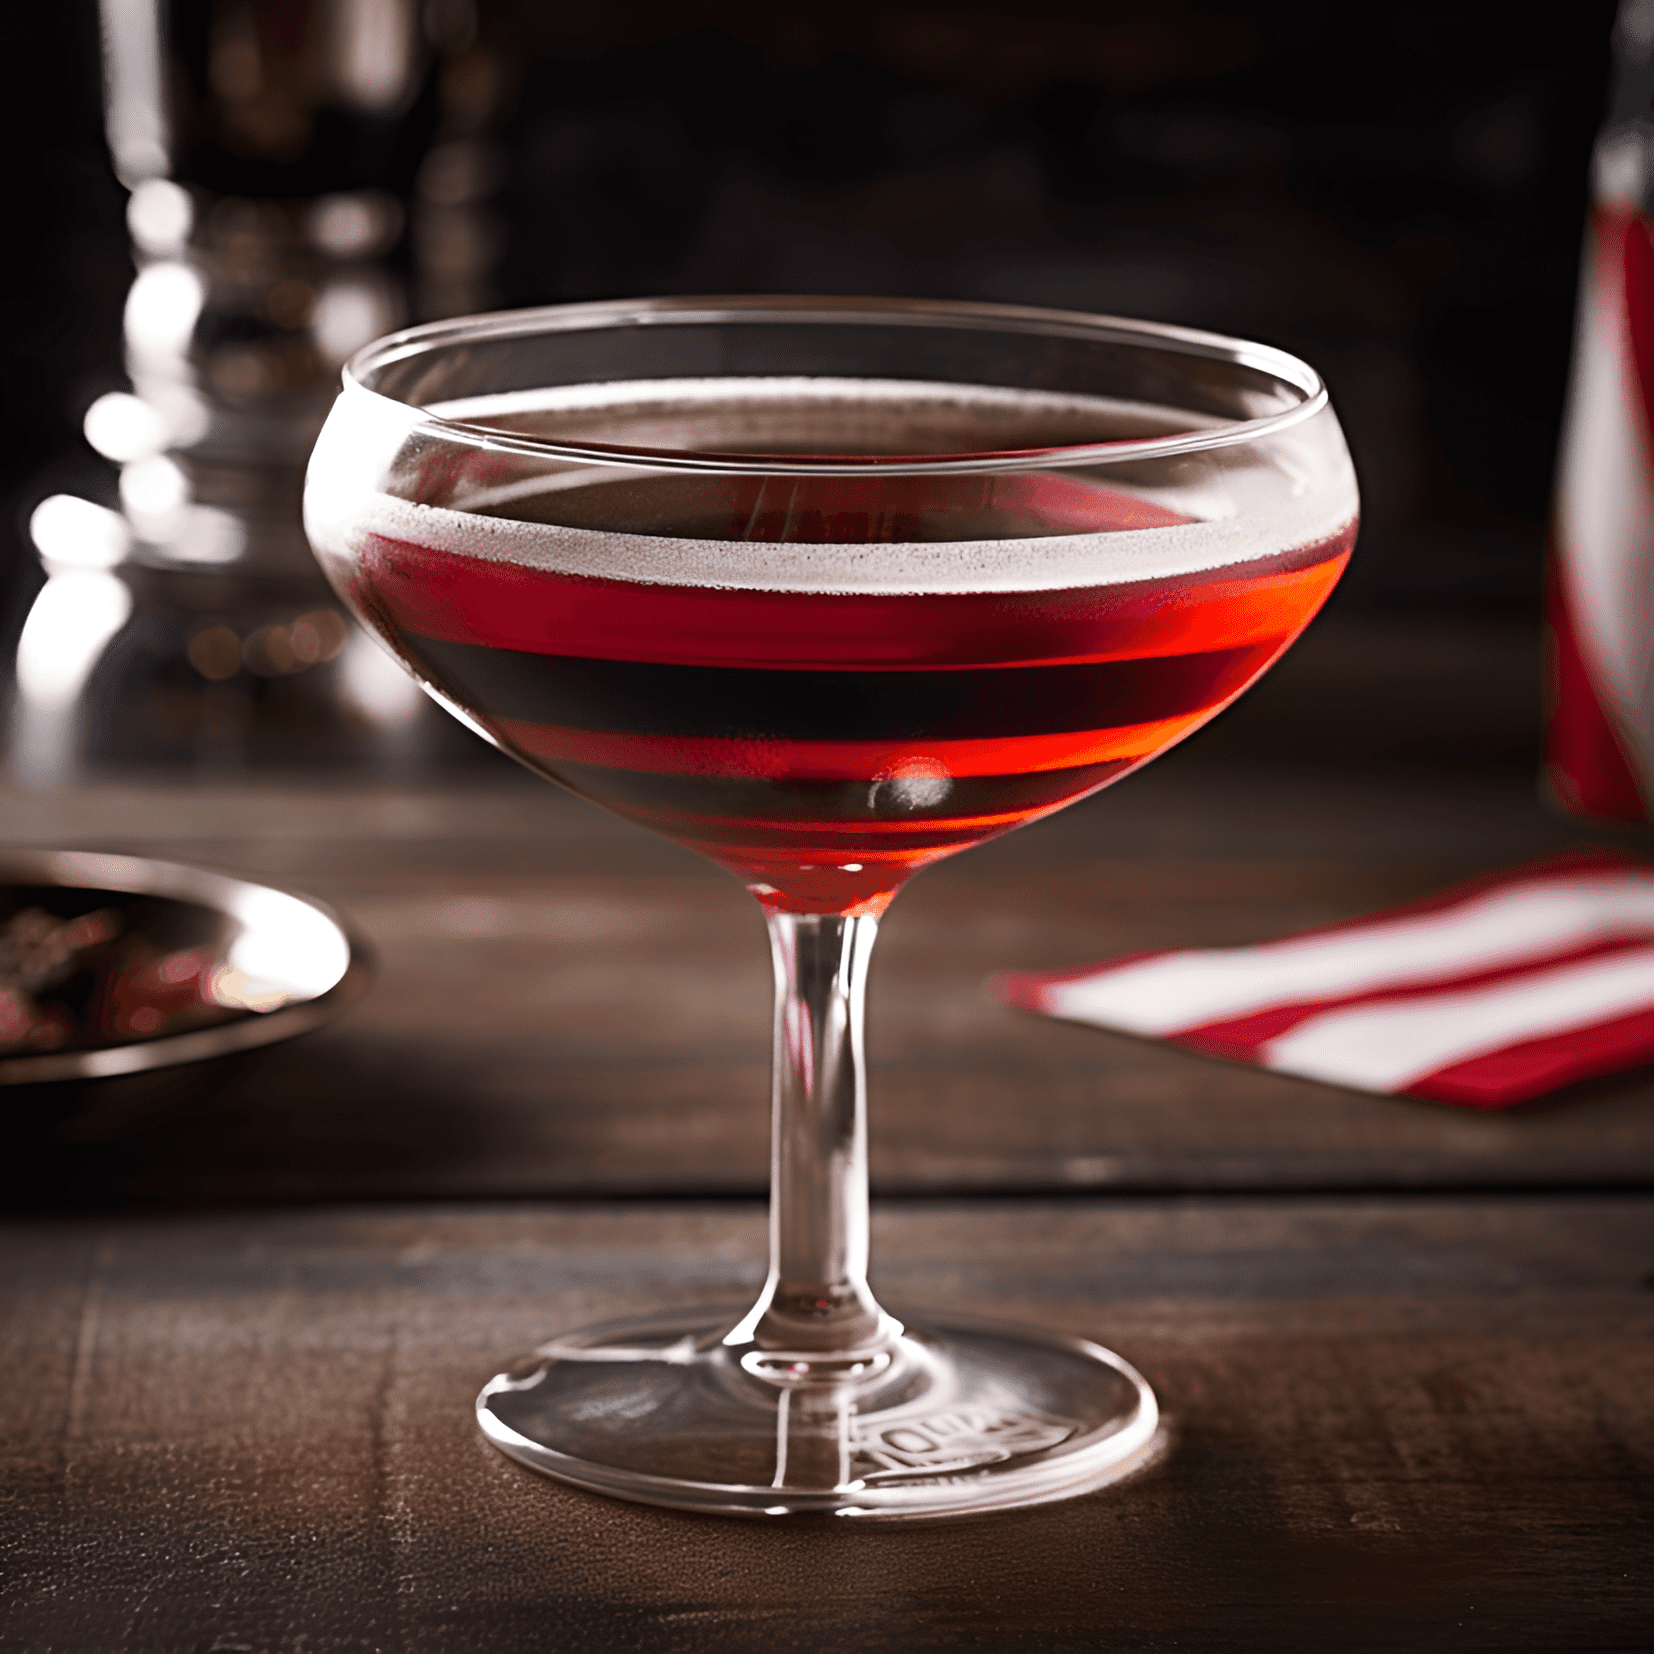 Betsy Ross Cocktail Recipe - The Betsy Ross cocktail has a rich, velvety texture with a hint of sweetness from the port wine. The brandy adds warmth and depth, while the orange liqueur brings a touch of citrus brightness. The nutmeg garnish enhances the overall flavor with a subtle spiciness.